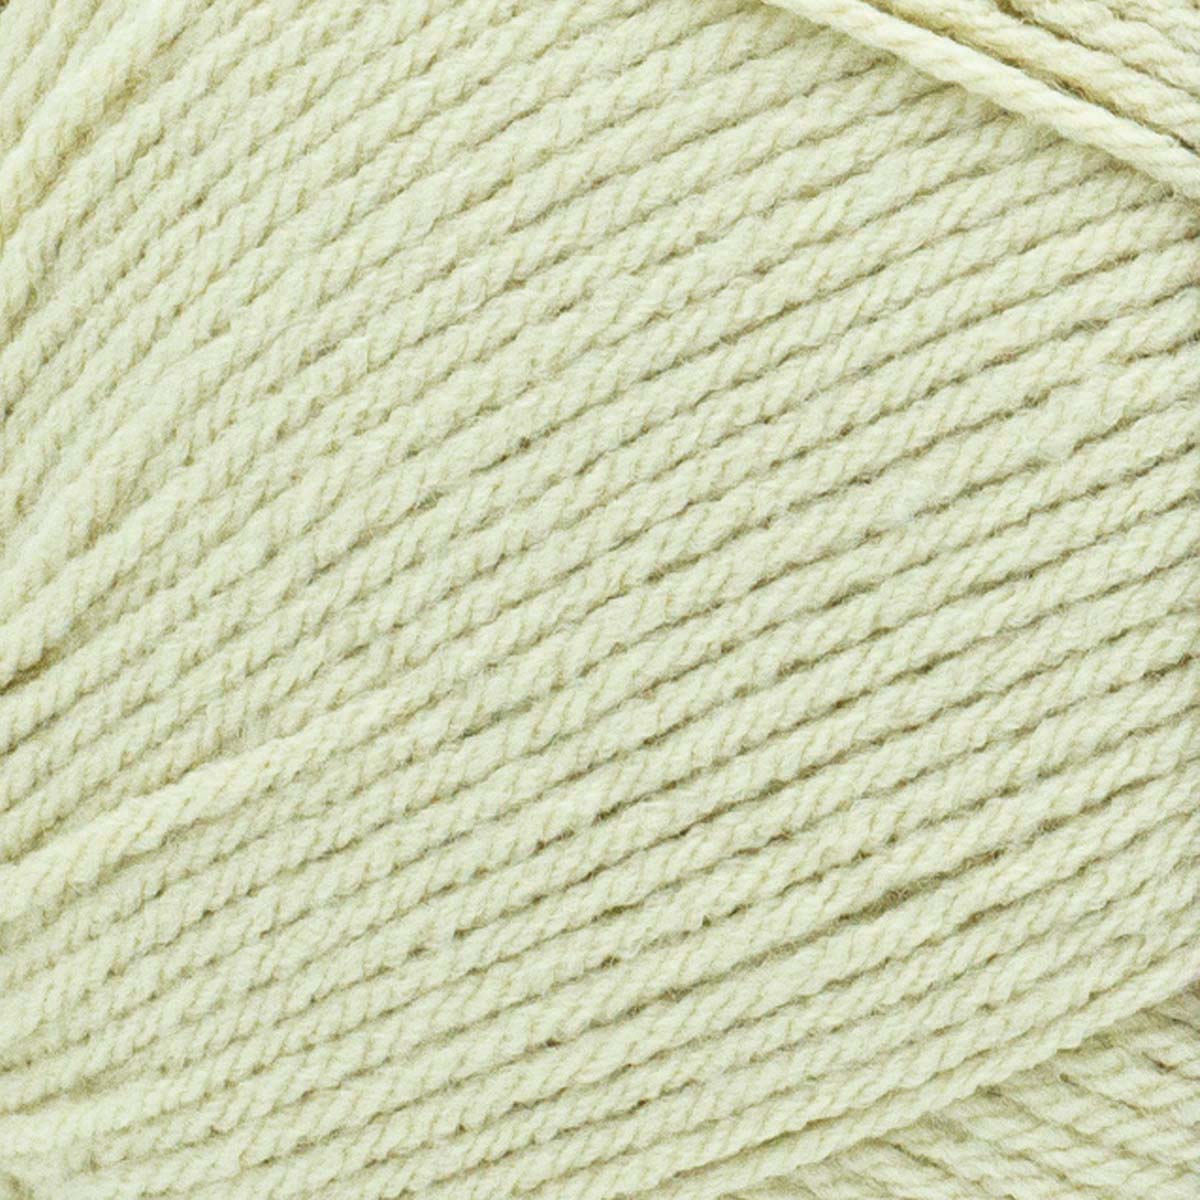  Lion Brand Yarn Pound of Love, Value Yarn, Large Yarn for  Knitting and Crocheting, Craft Yarn, Thistle